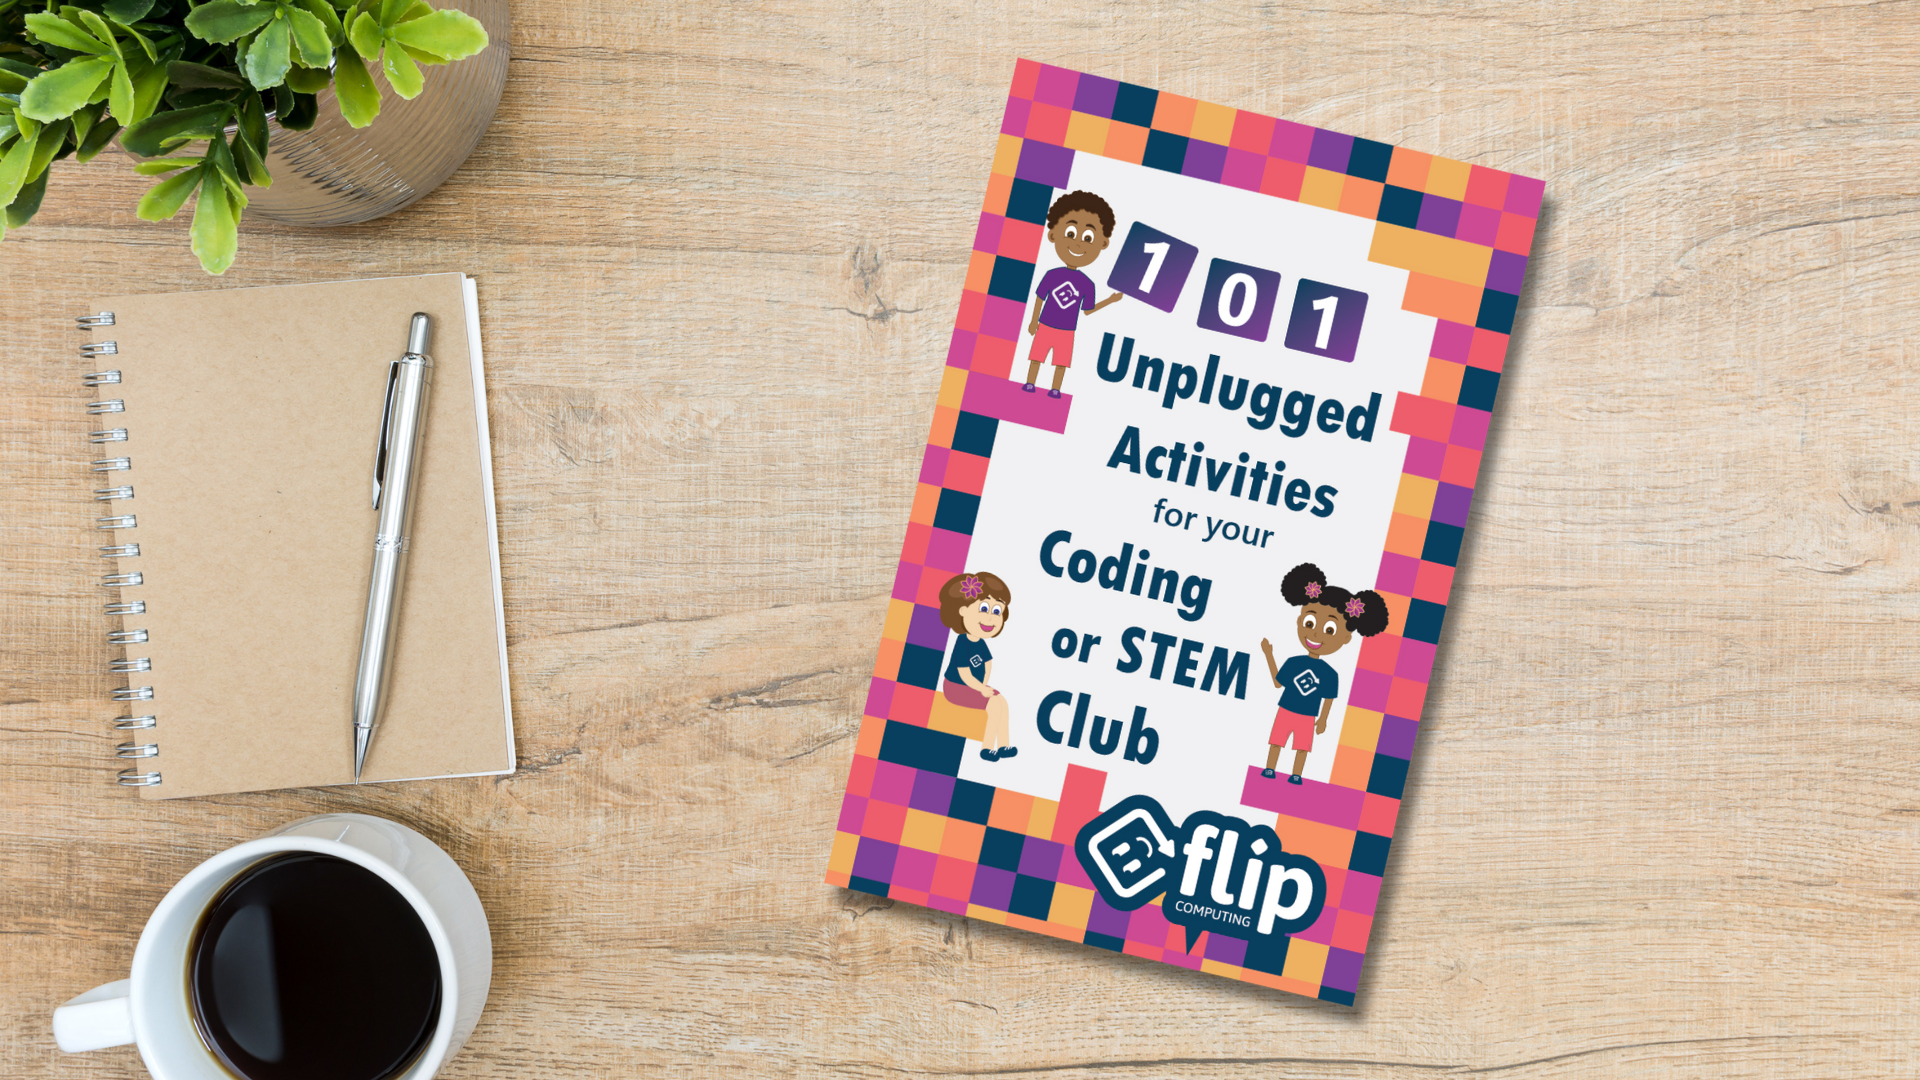 A copy of the book '101 unplugged activities for your coding or STEM club' is placed on a table next to a cup of coffee.